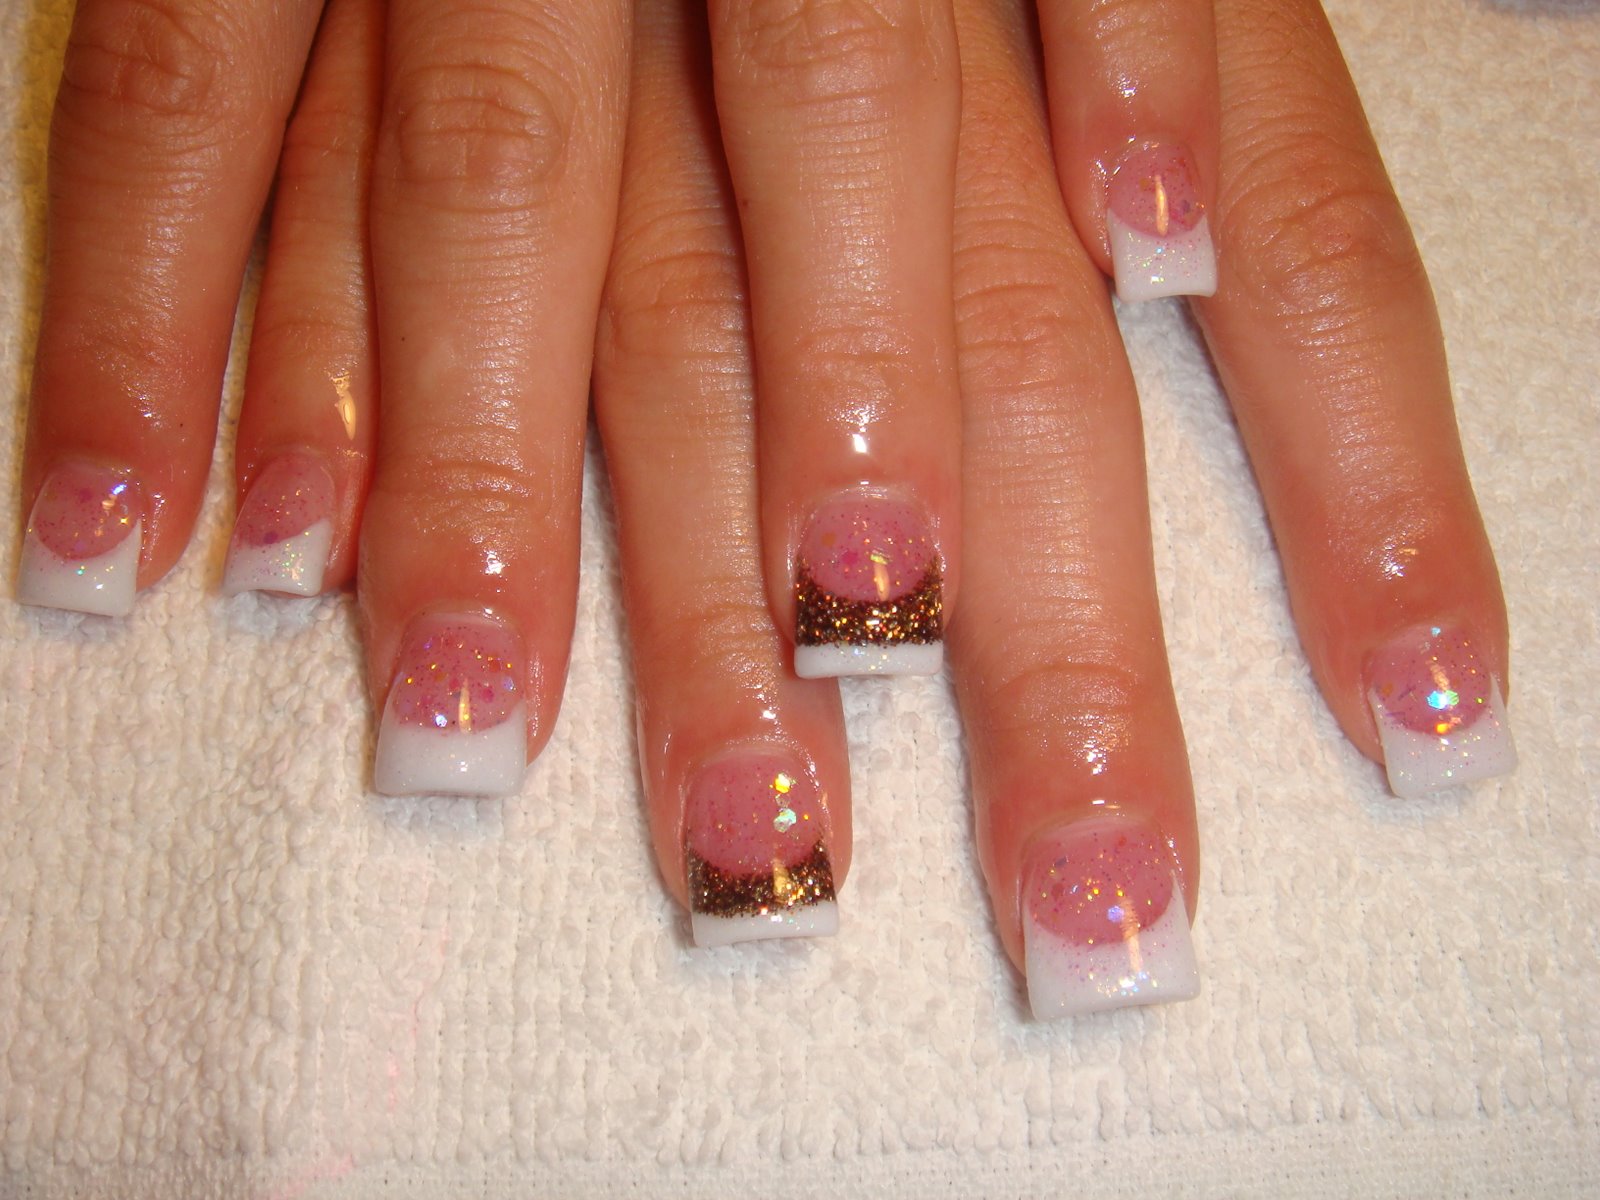 4. "Floral Prom Nail Designs for a Romantic Look" - wide 7